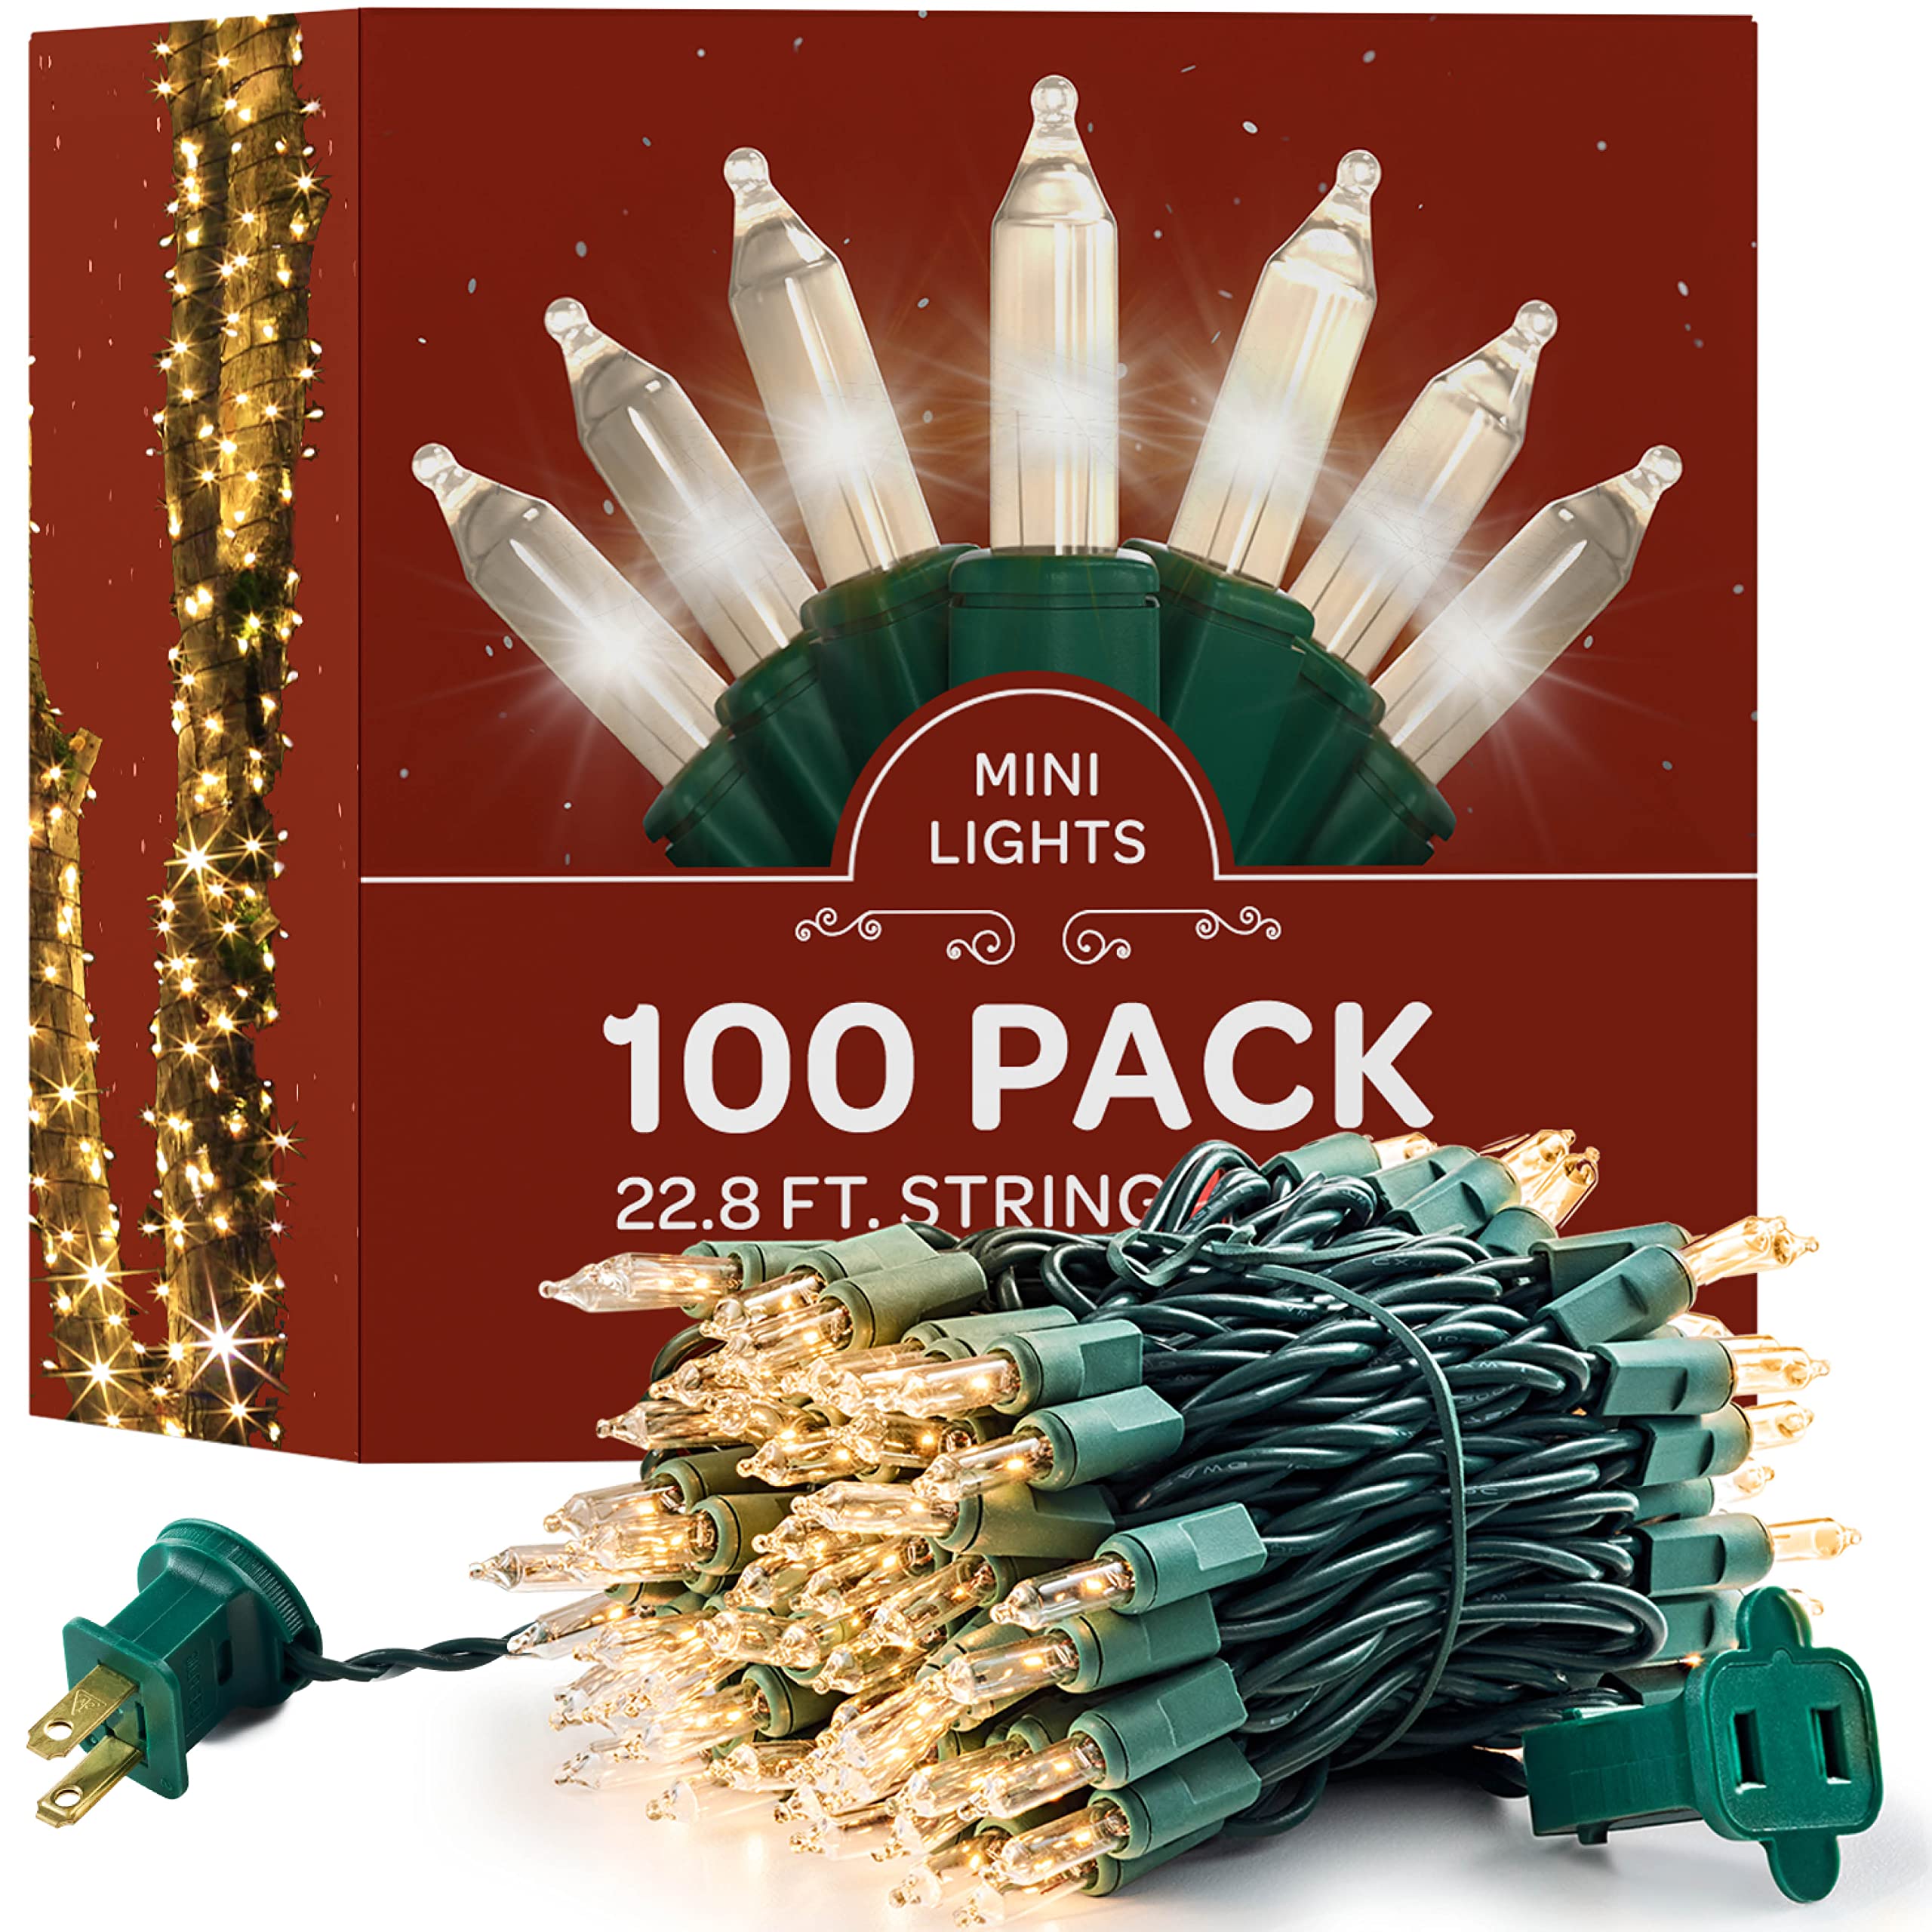 Christmas Lights [Set of 100] Warm White Christmas Lights, UL Listed for Indoor/Outdoor Use, Mini Christmas Lights, Small Christmas Lights for Holiday/Party Festival Decorations 22.8 Ft (Green Wire)  - Like New